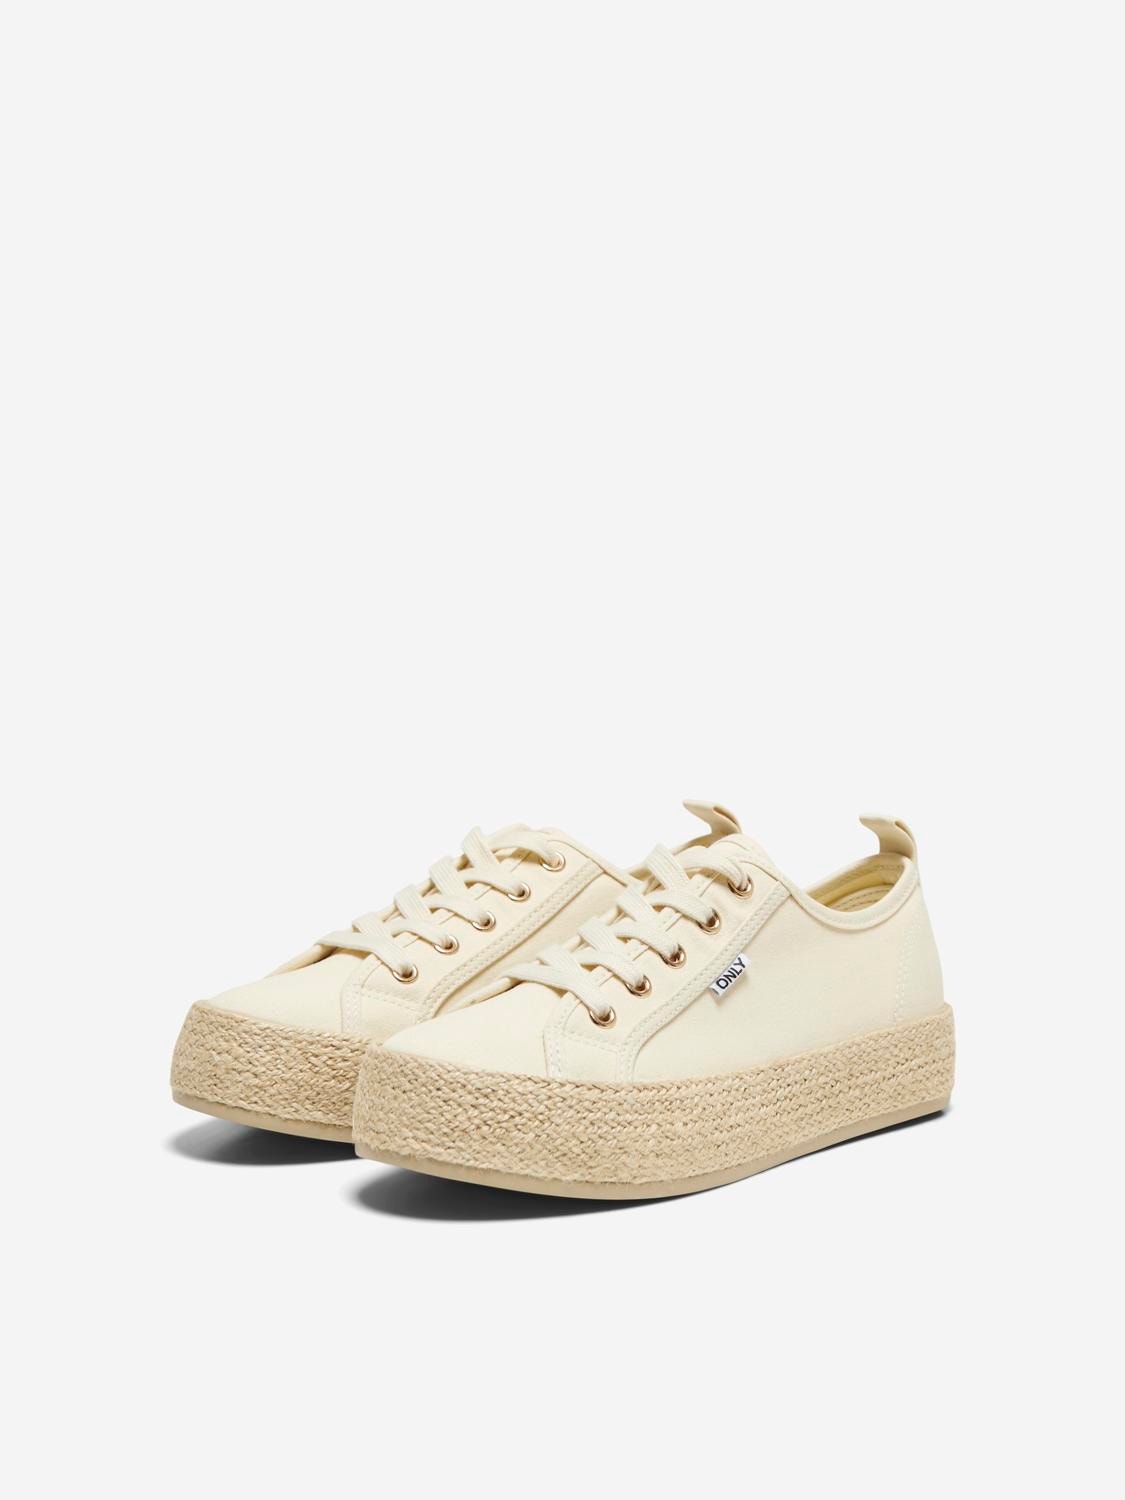 ONLY Espardrille sneakers -Creme - 15319621